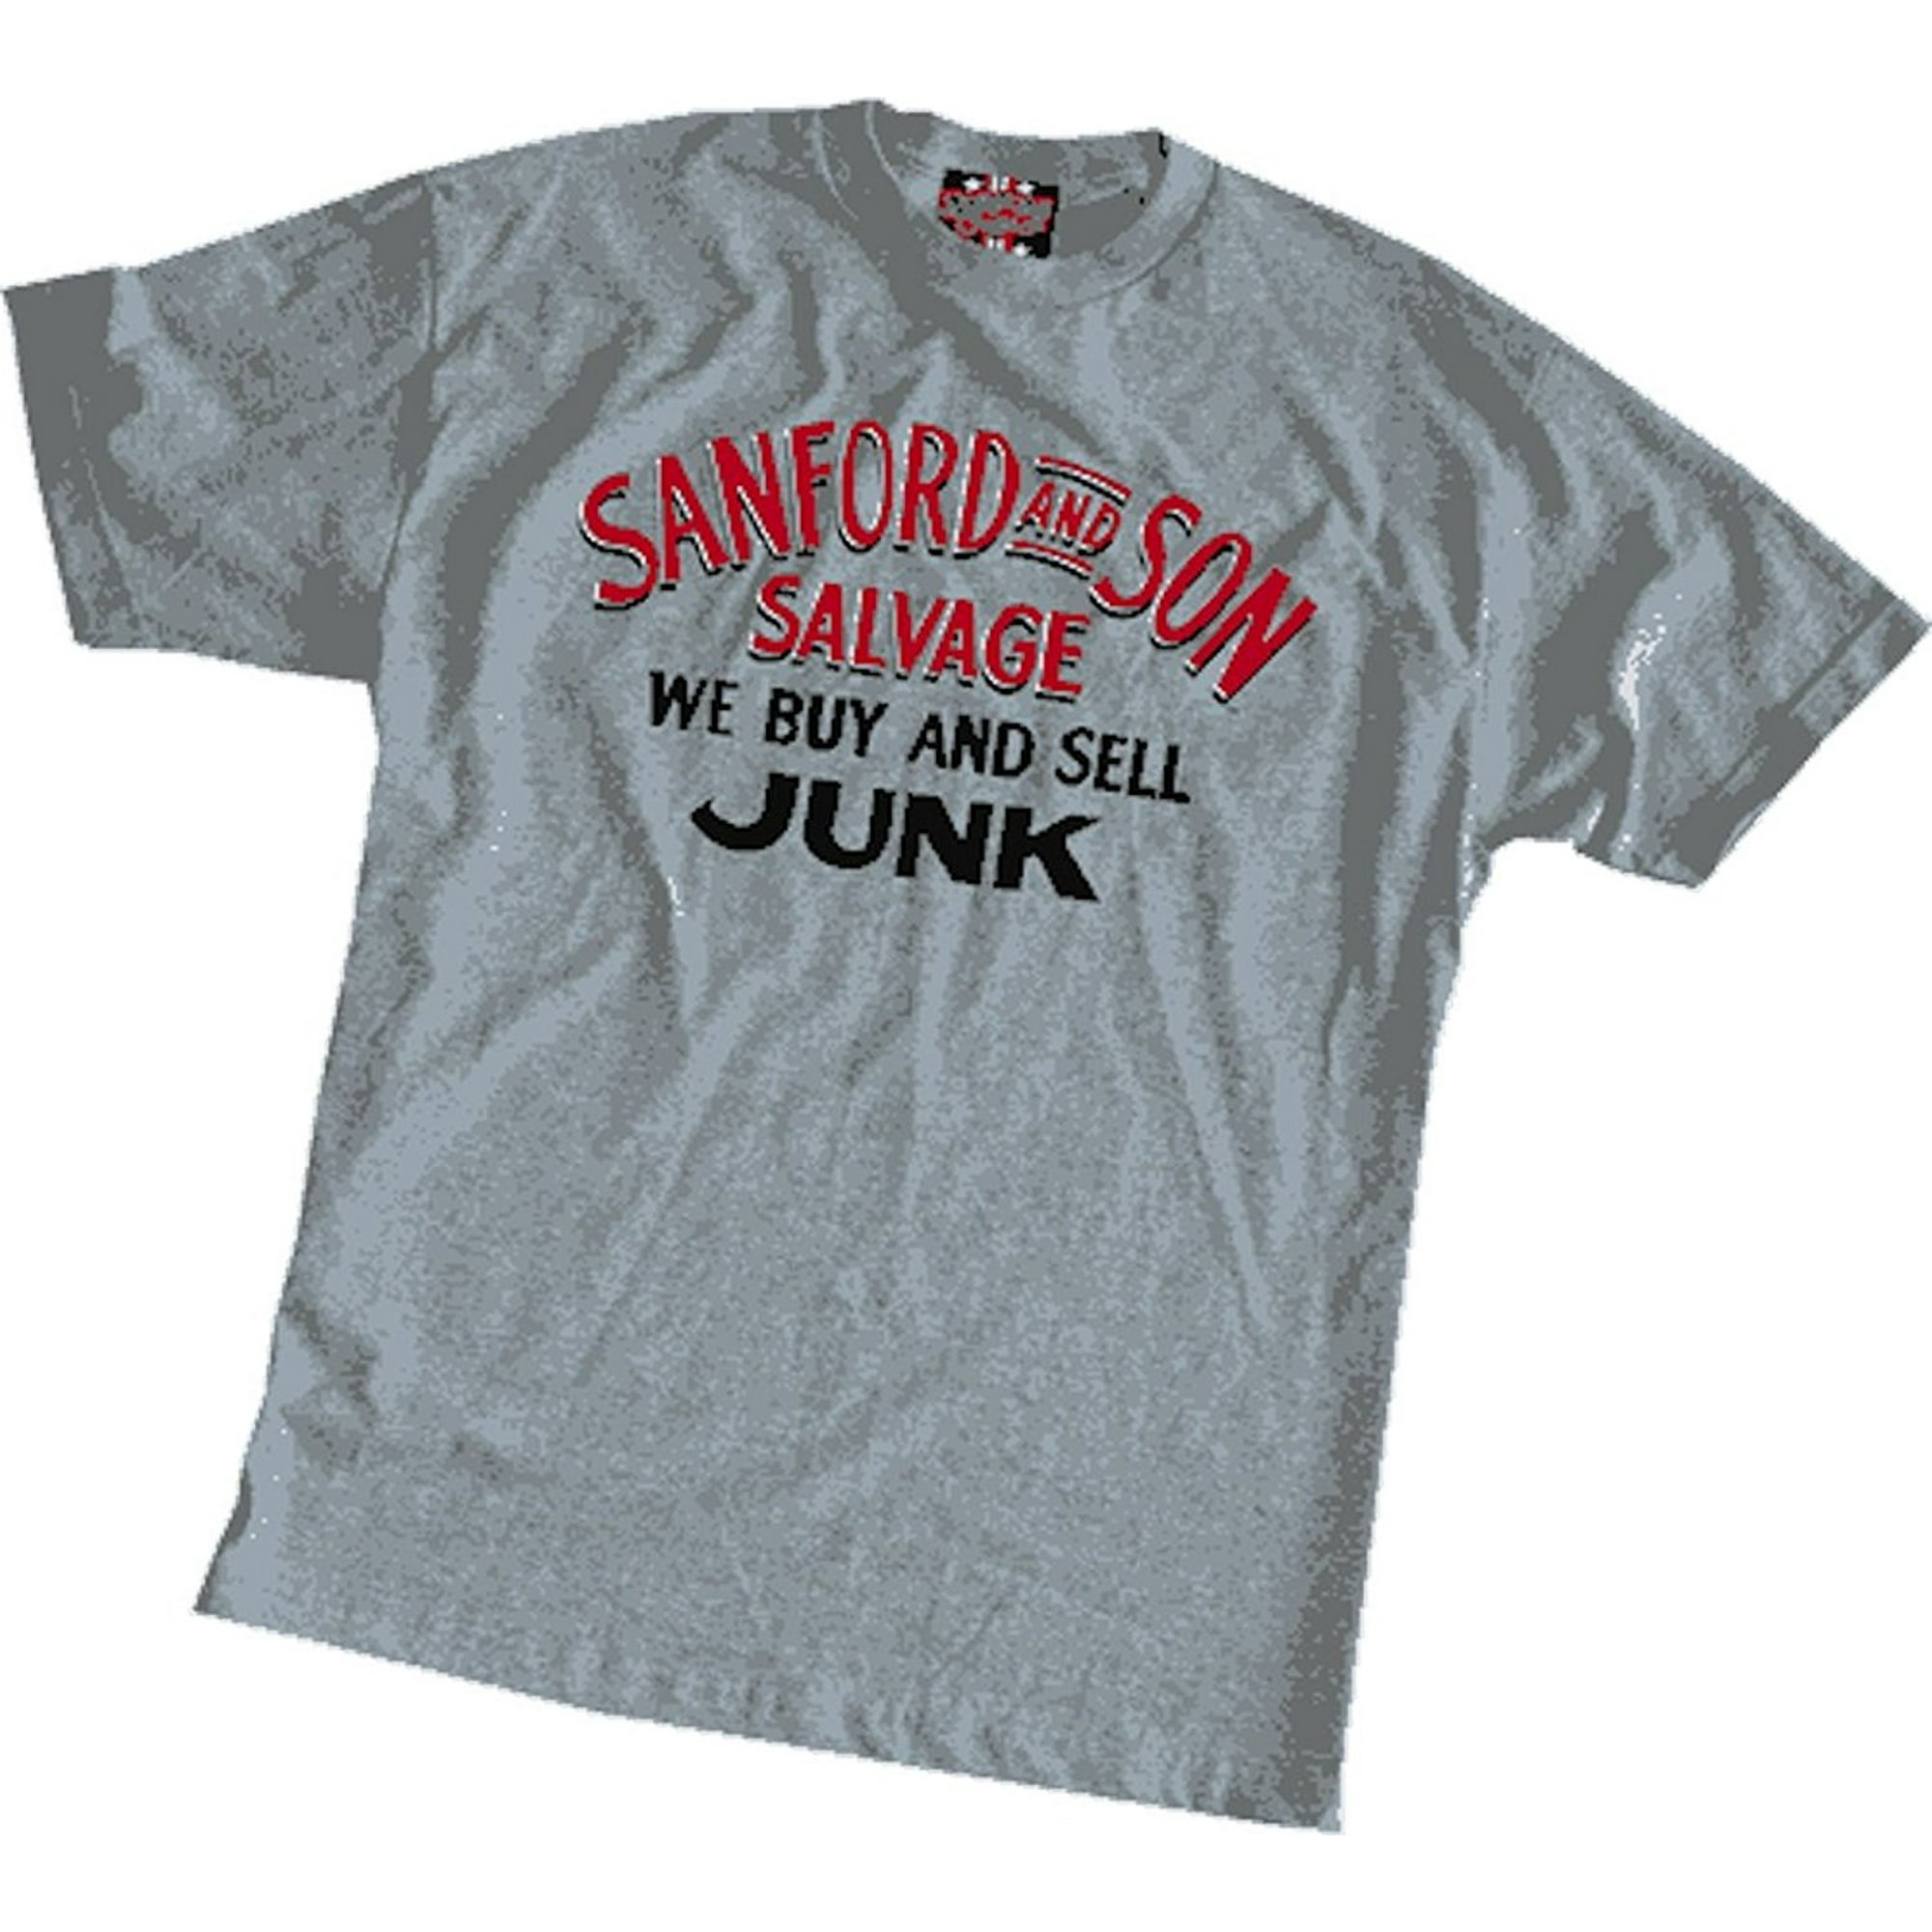 Sanford and Son Buy and Sell Junk Adult T-shirt - Walmart.com